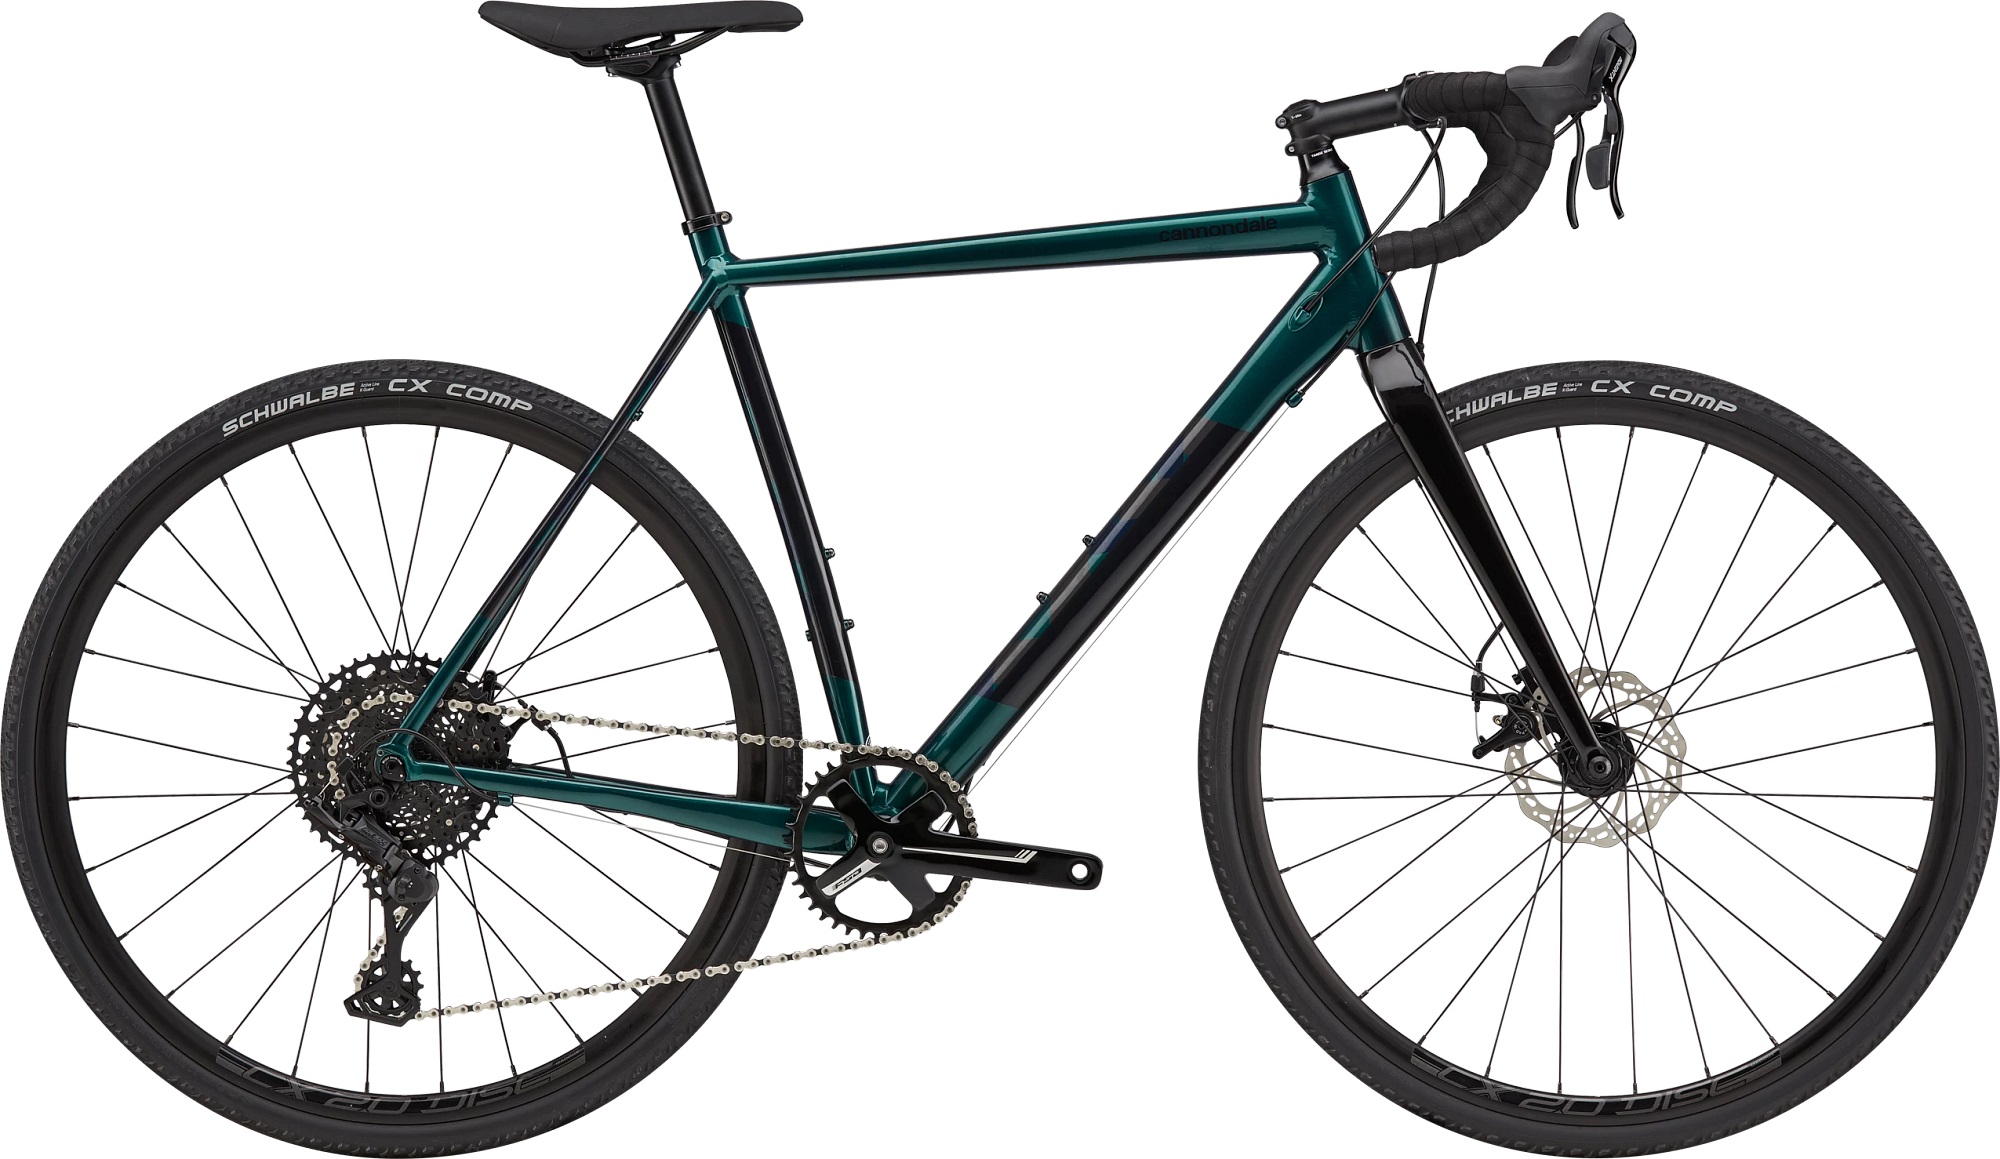 CANNONDALE CAADX 2 2021 Emerald